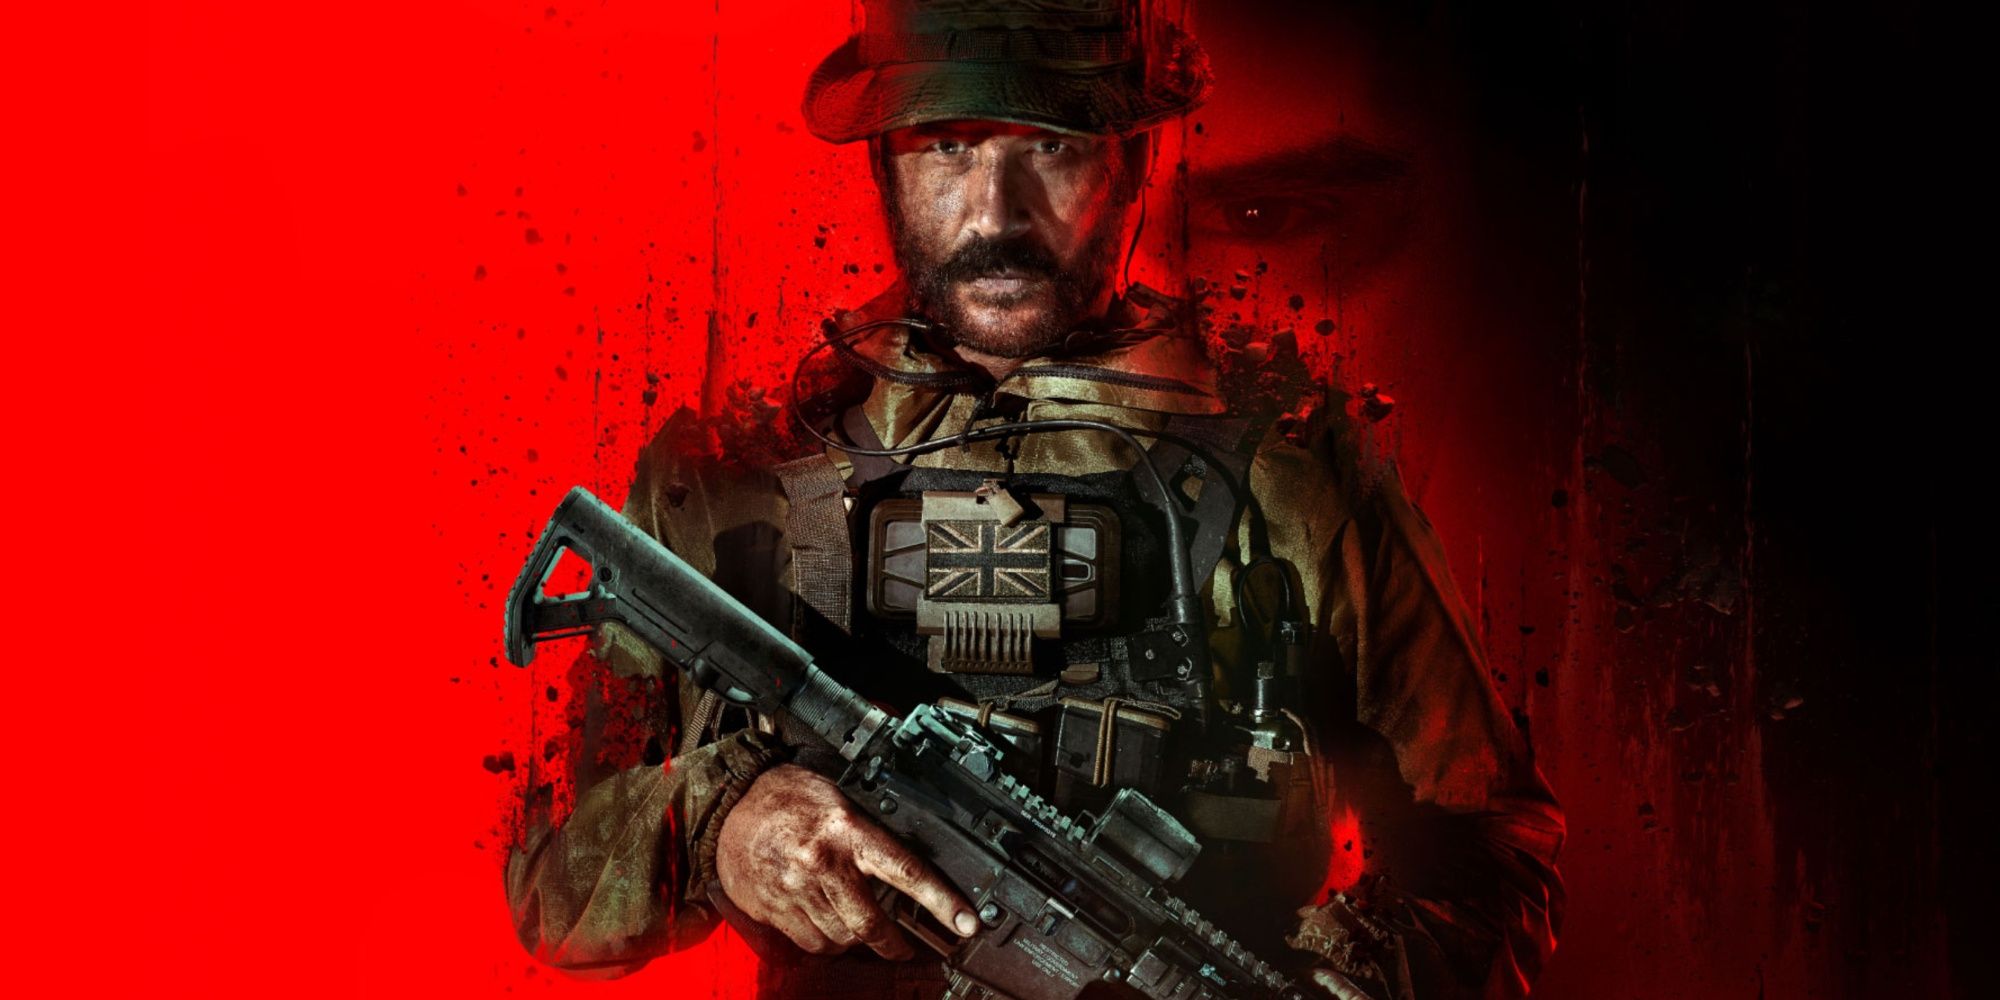 call of duty modern warfare 3 cover art showing Price holding a gun over a red background with a face in the shadow